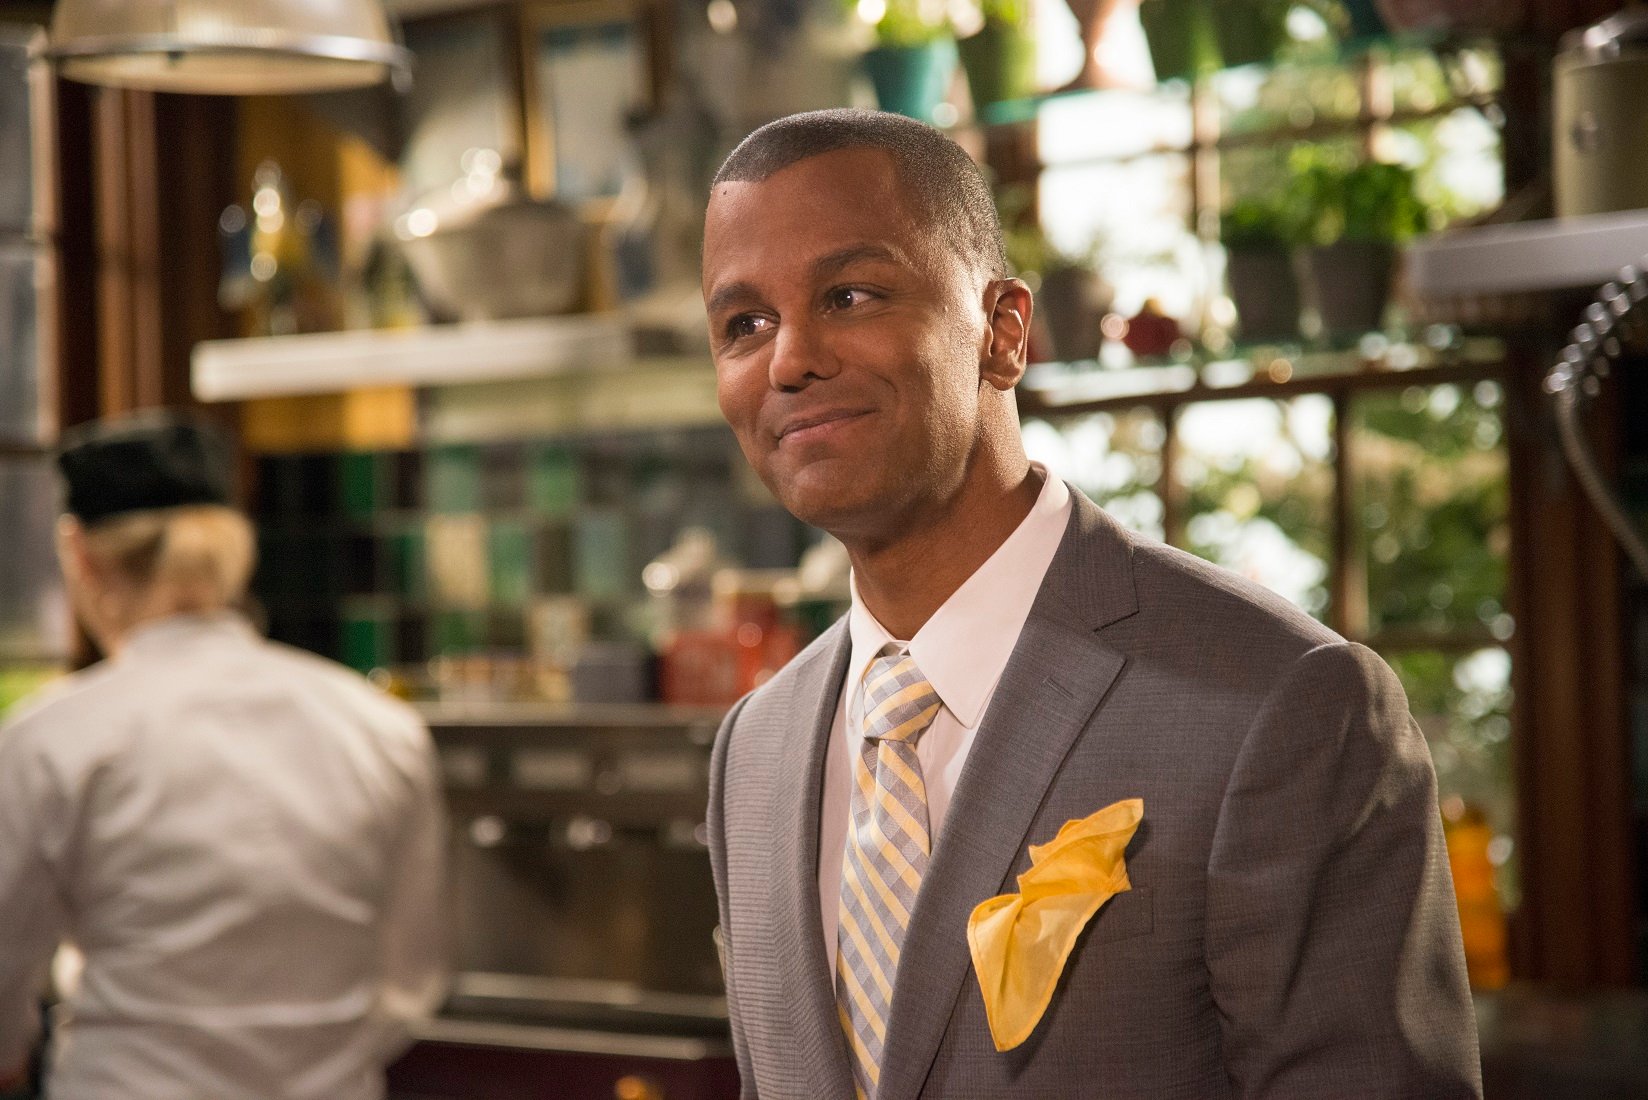 Yanic Truesdale as Michel Gerrard stands in the kitchen of the Dragonfly Inn in 'Gilmore Girls: A Year in the Life' 